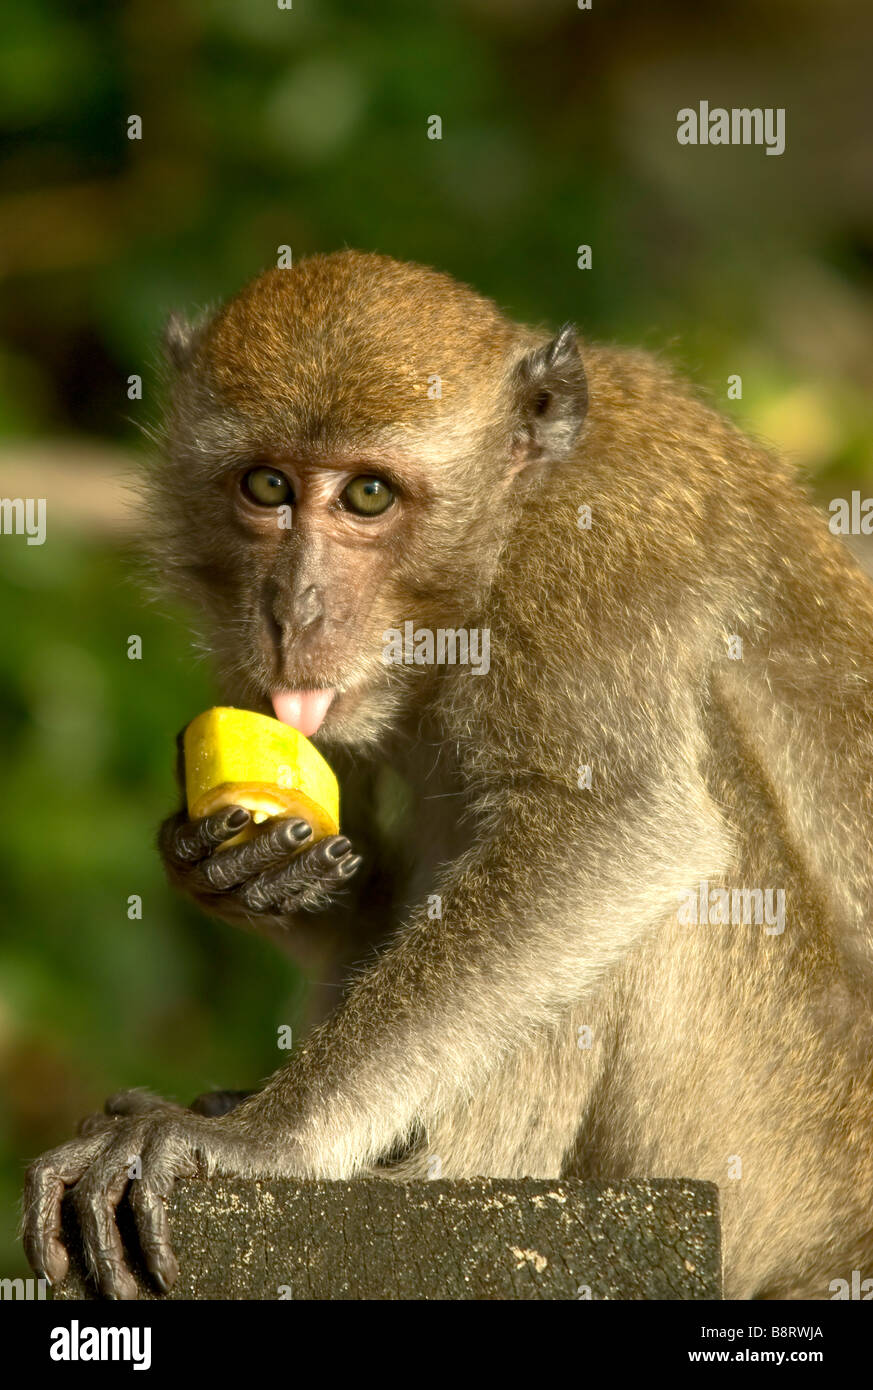 Portrait Image of a Macaque monkey licking at a piece of Banana looking directly into the Camera Stock Photo